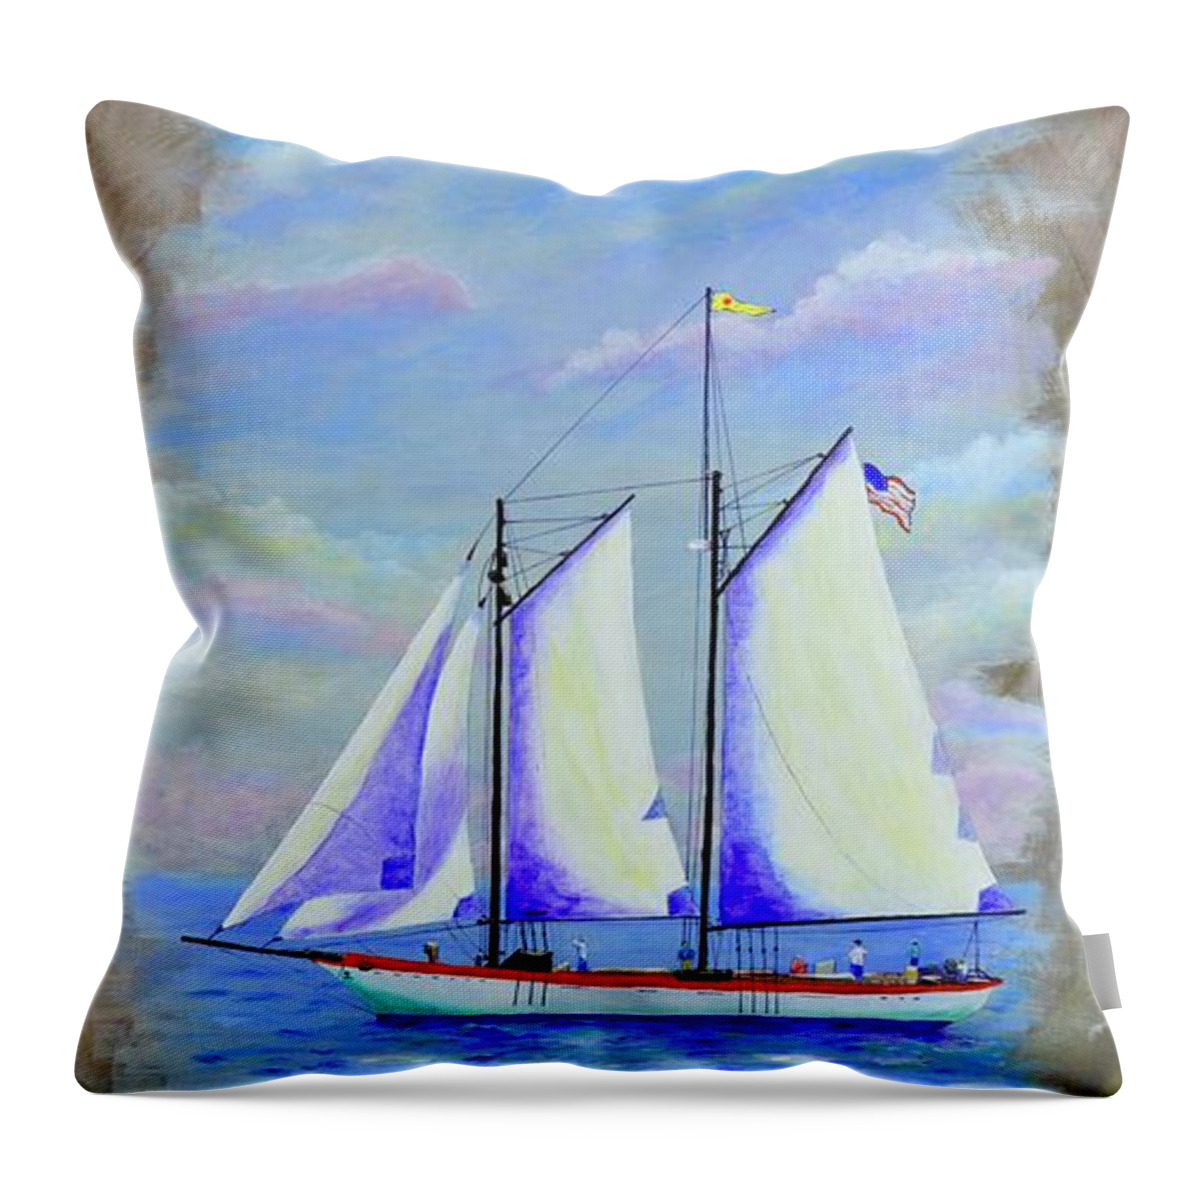 Schooner Throw Pillow featuring the painting Schooner by Mary Scott